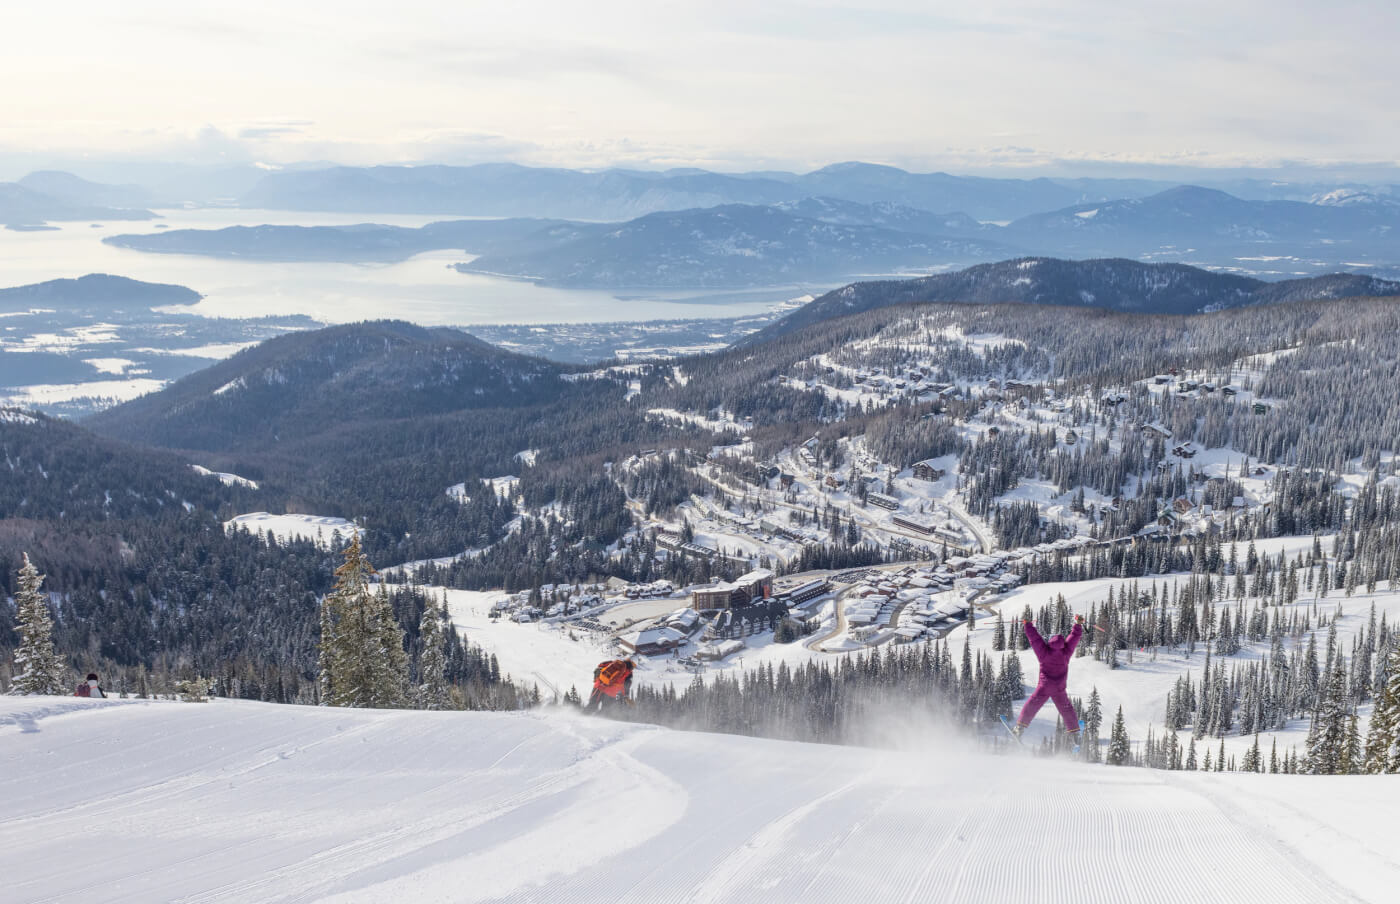 Scenic view of Schweitzer, the perfect place for a selfie.